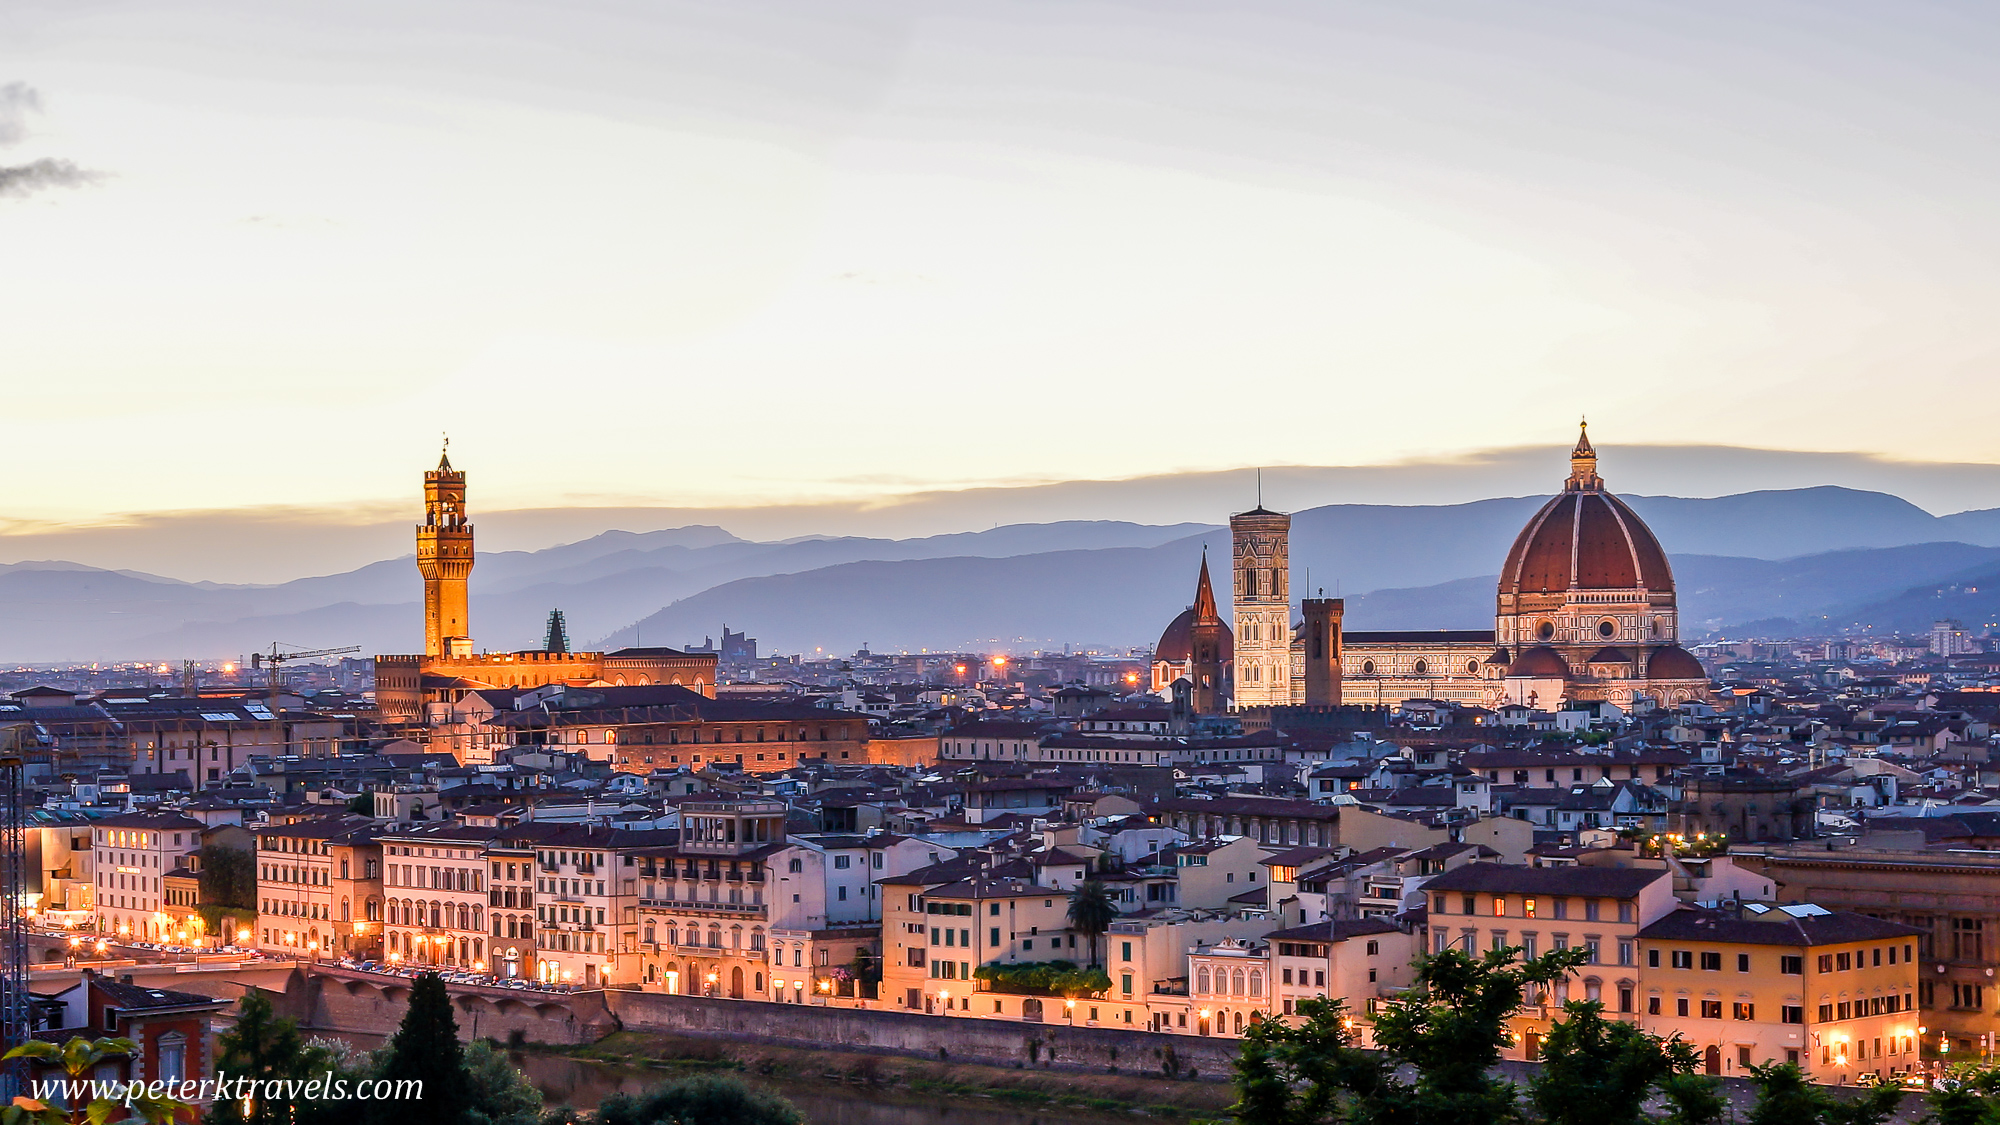 Dawn and Dusk in Florence – Peter's Travel Blog